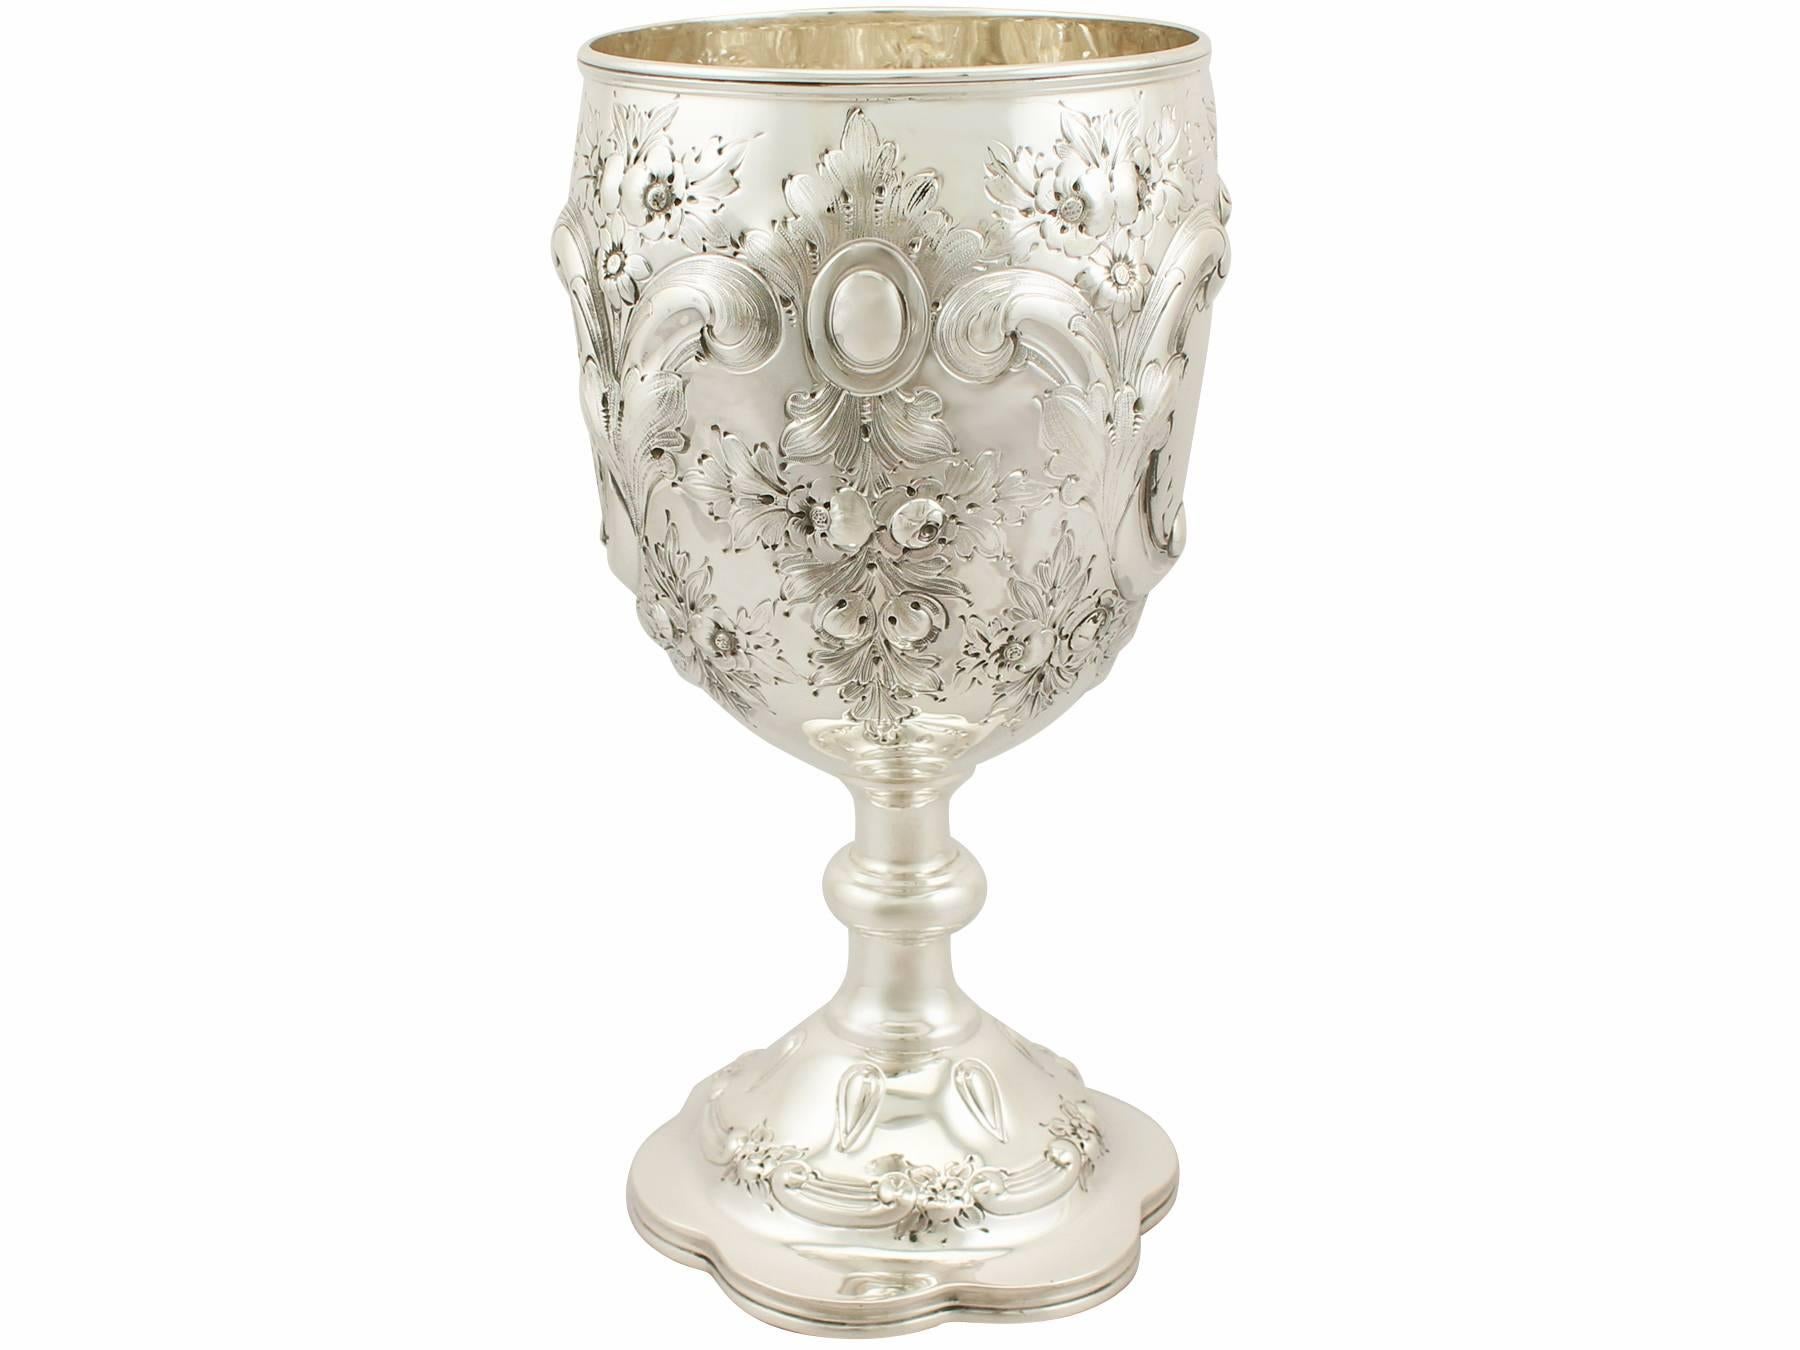 English Antique Edwardian Sterling Silver Presentation Cup